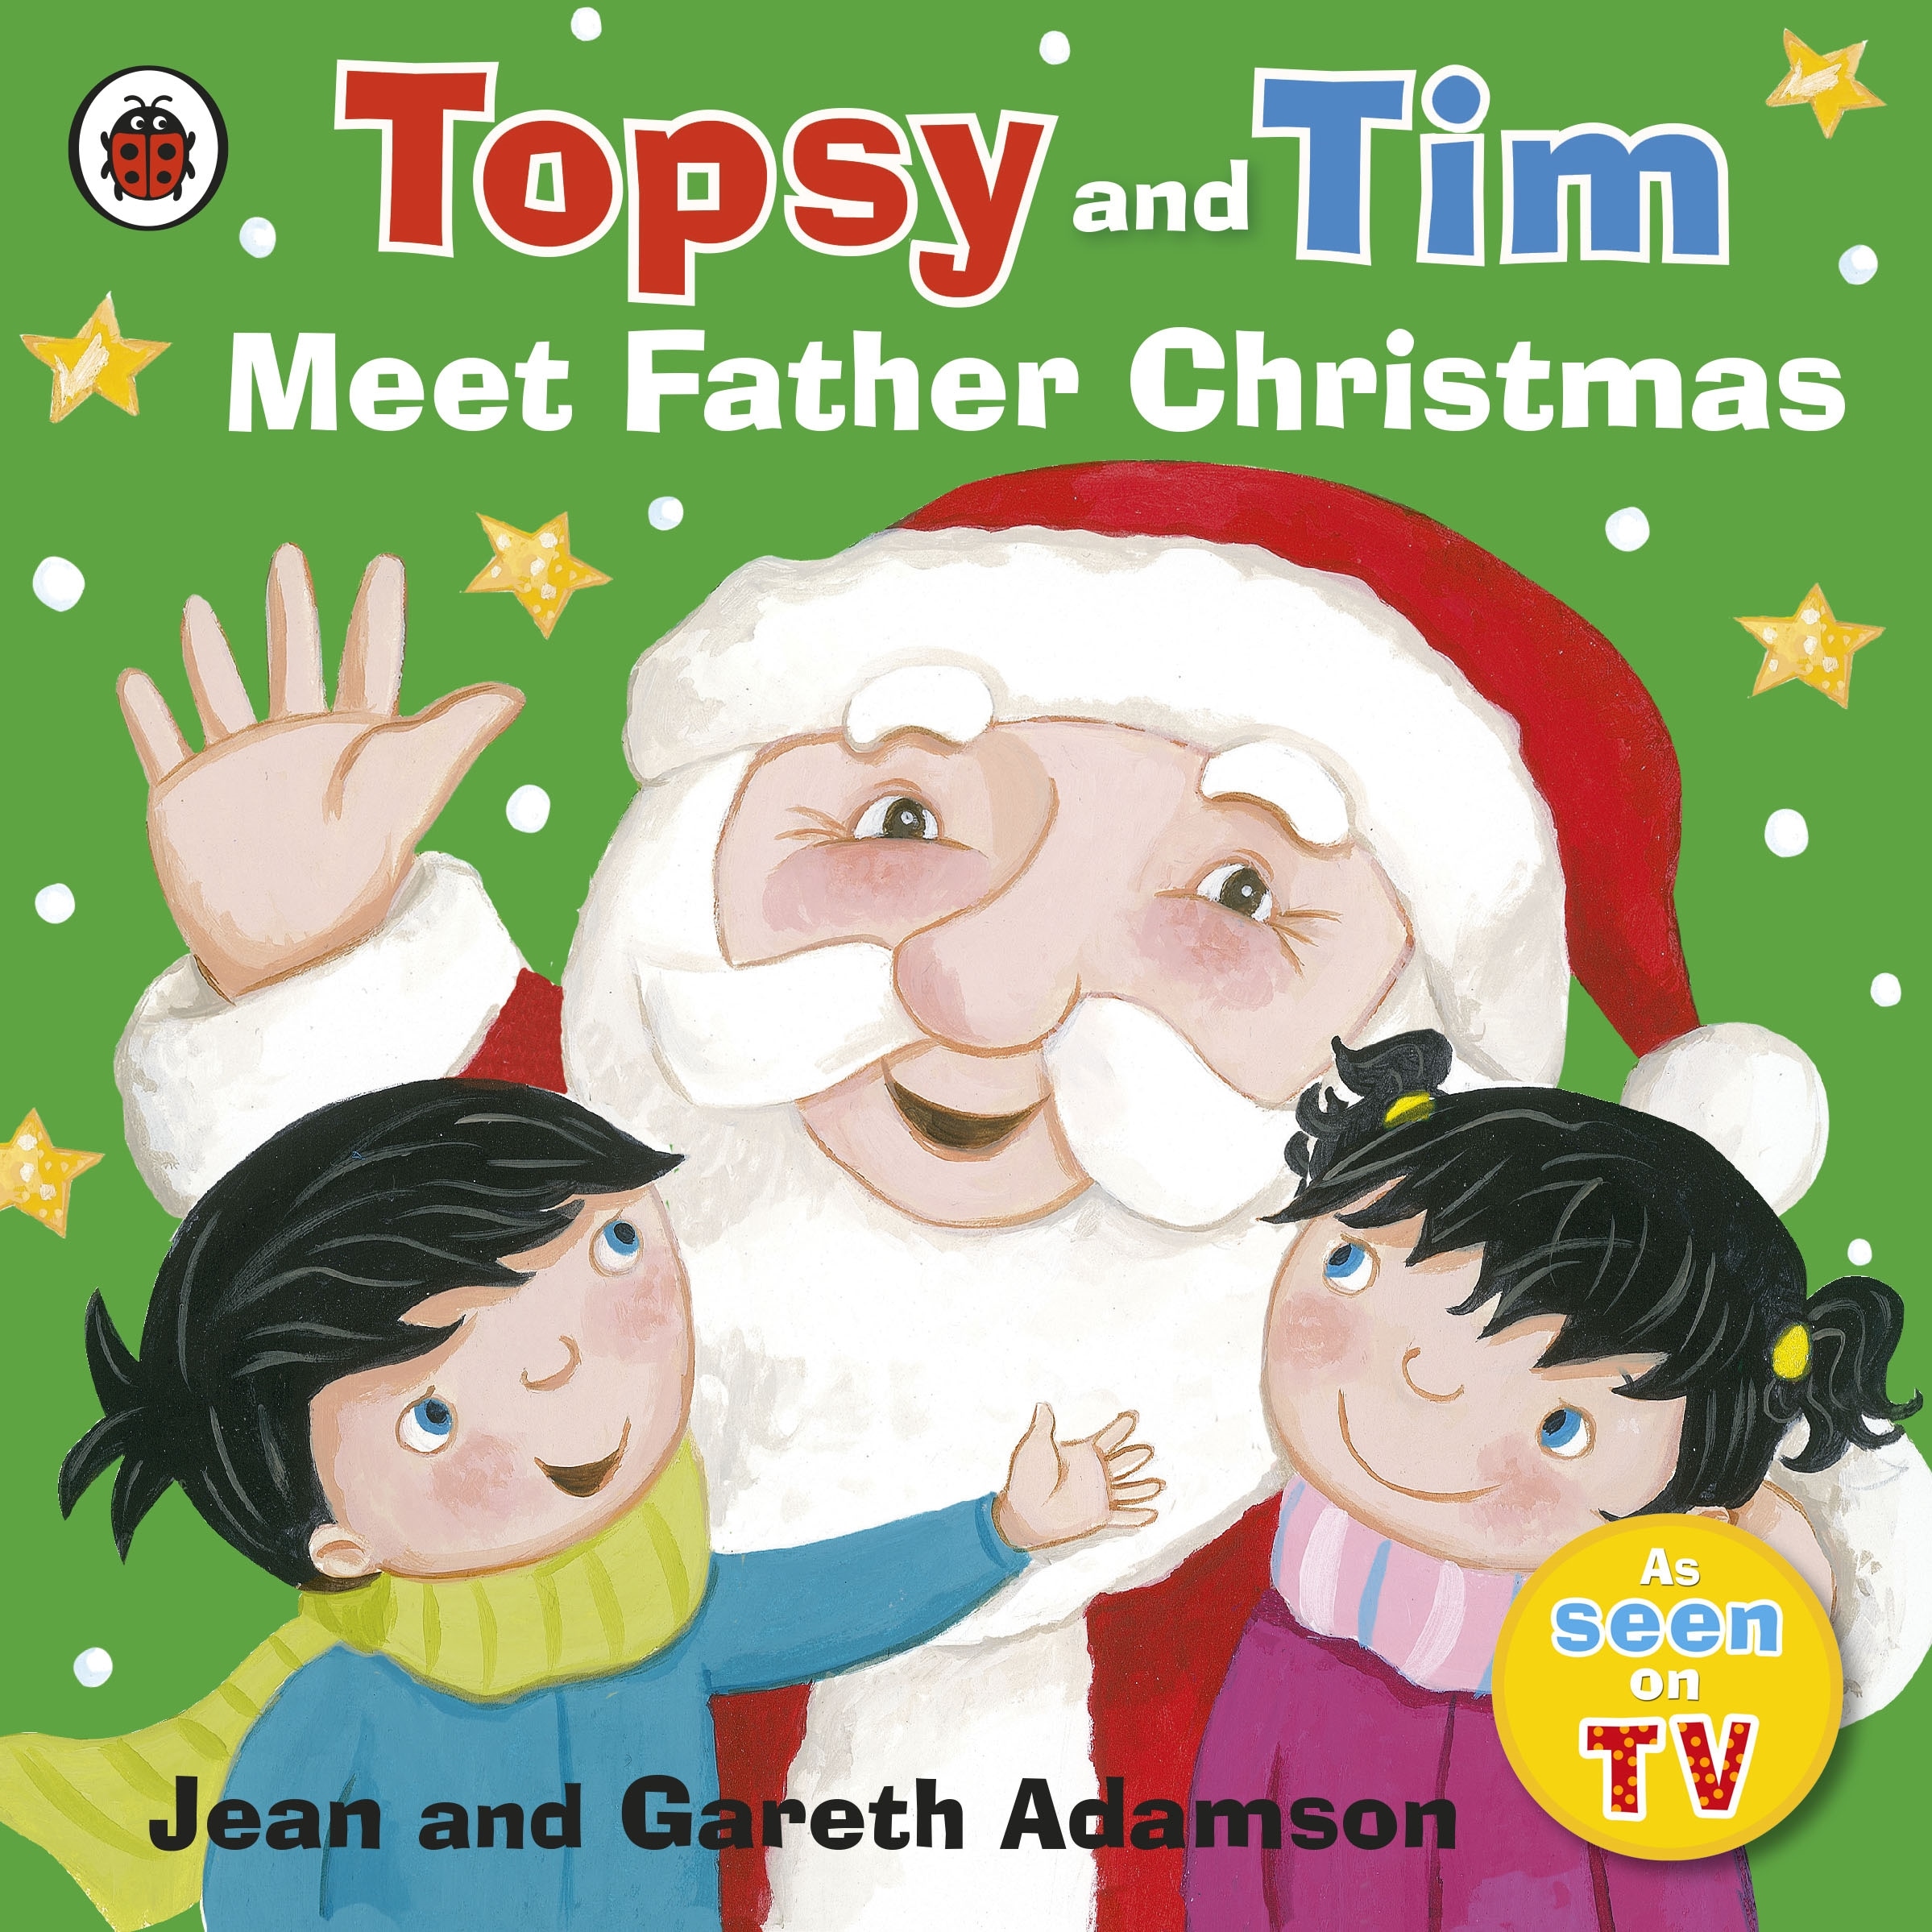 Book “Topsy and Tim: Meet Father Christmas” by Jean Adamson — October 3, 2013